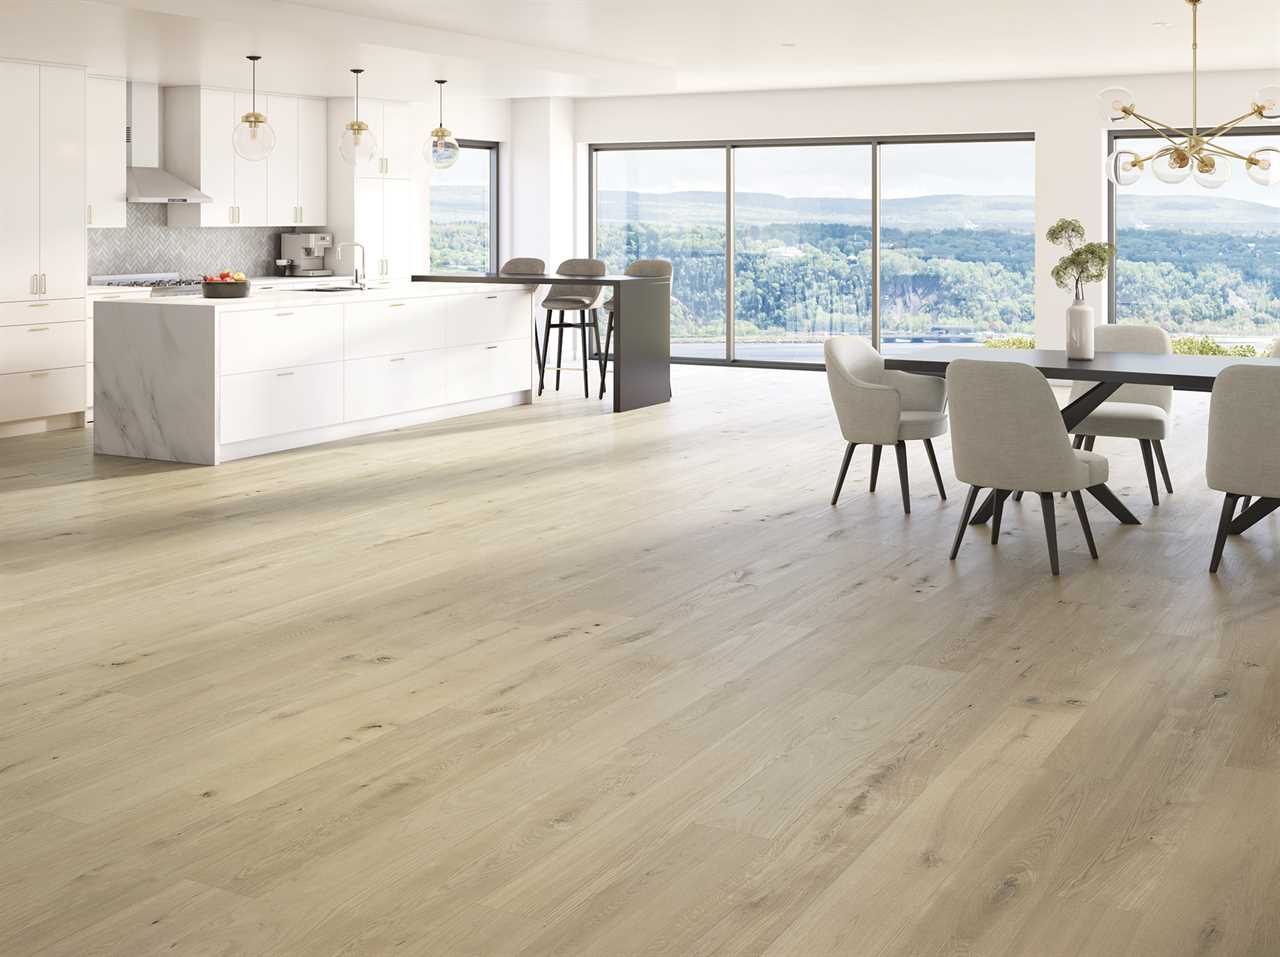 A white kitchen with wood floors and a view of the mountains.